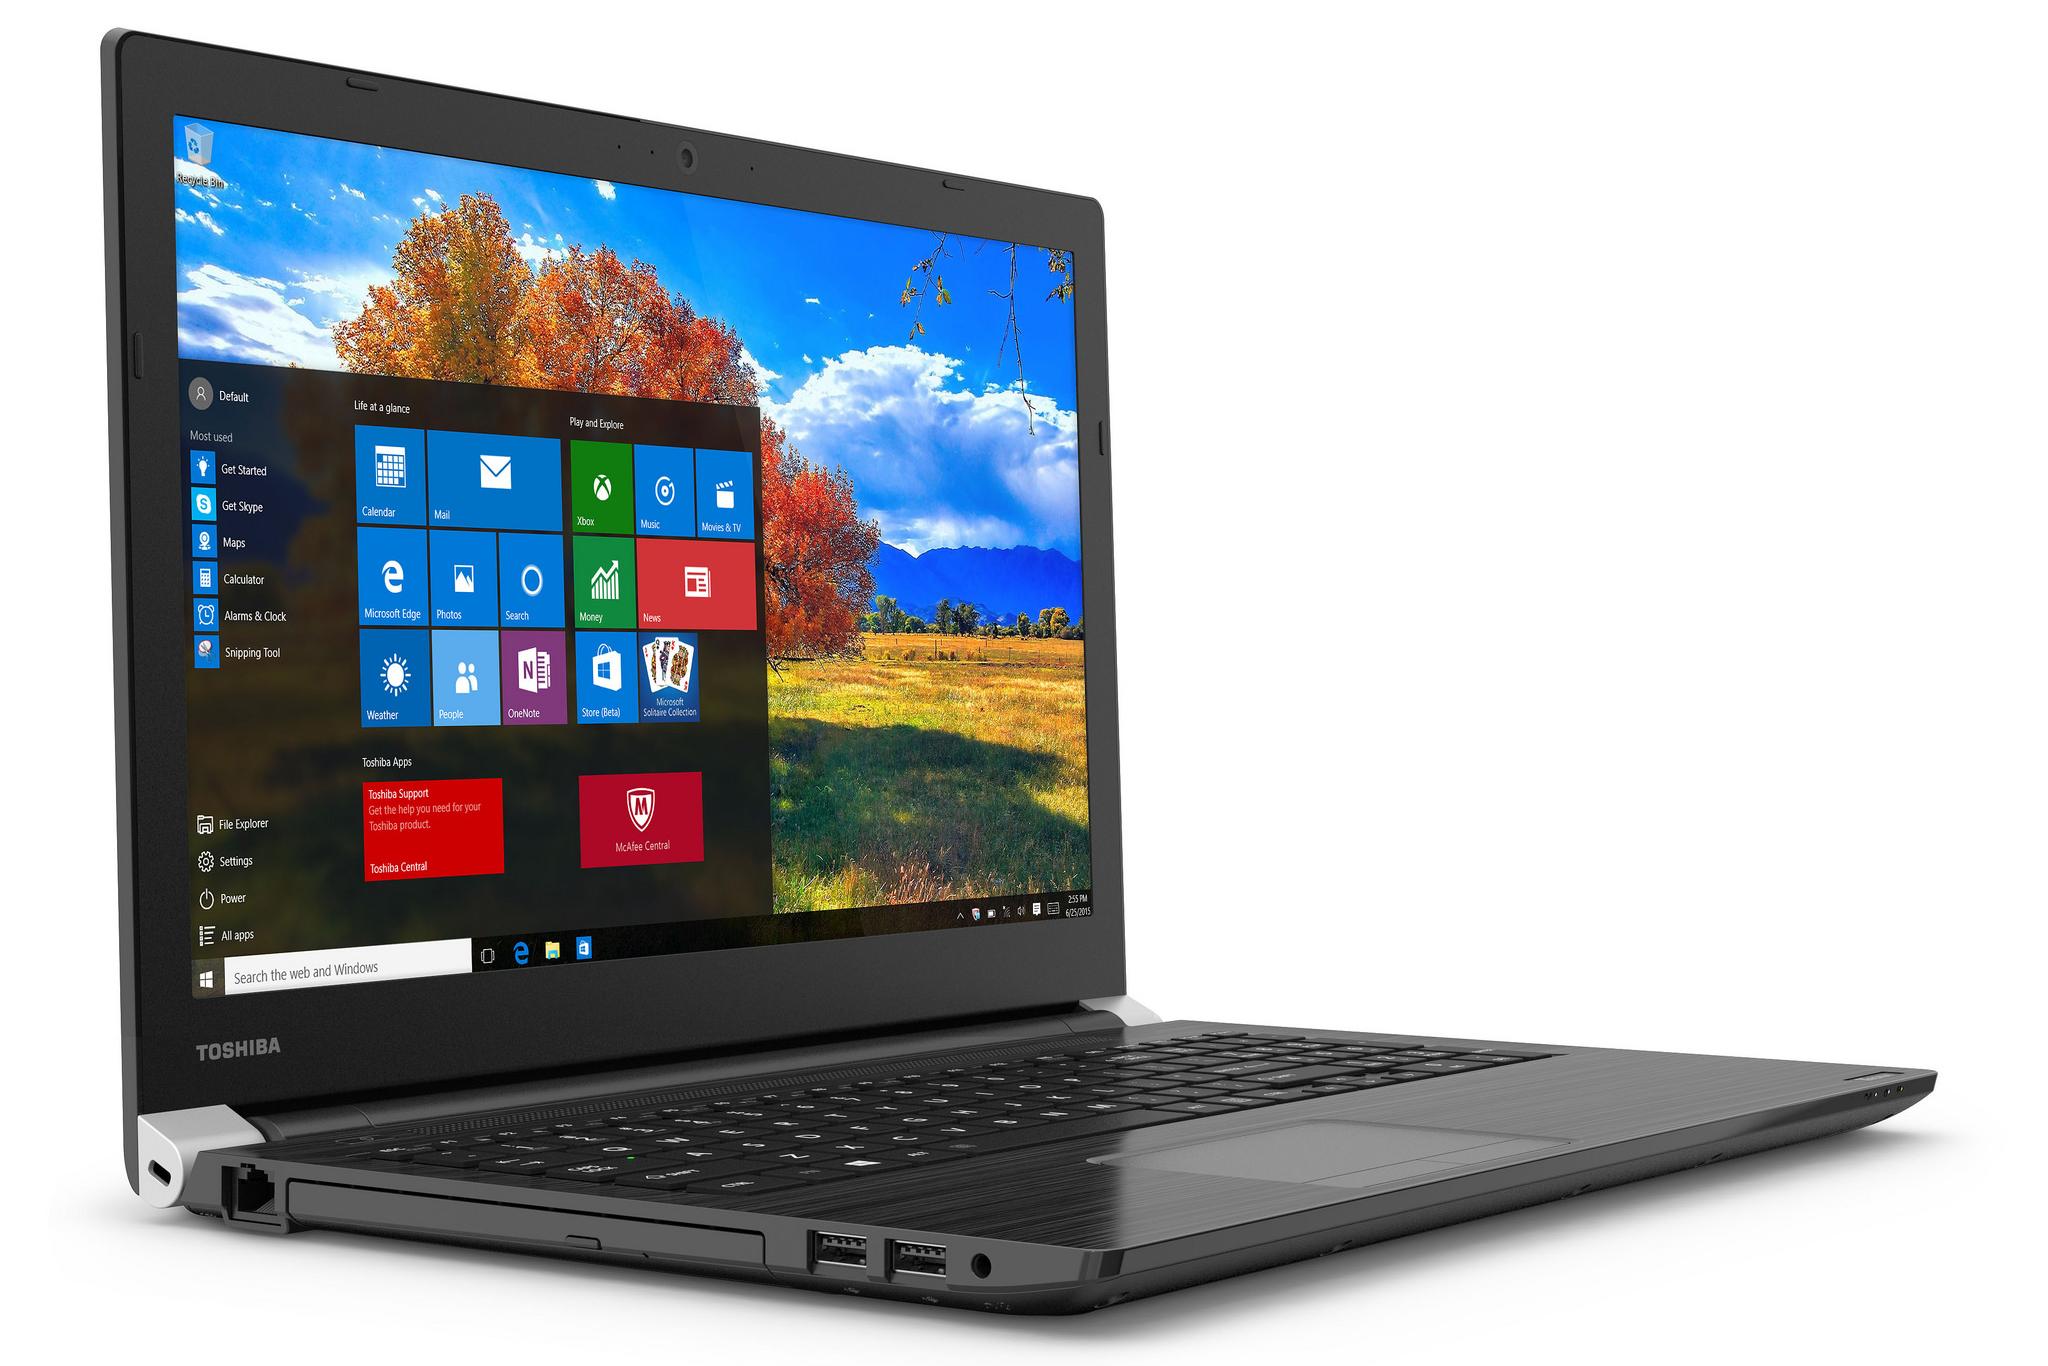 toshiba proves its ready for windows 10 with a selection of new pcs tecraa50 3